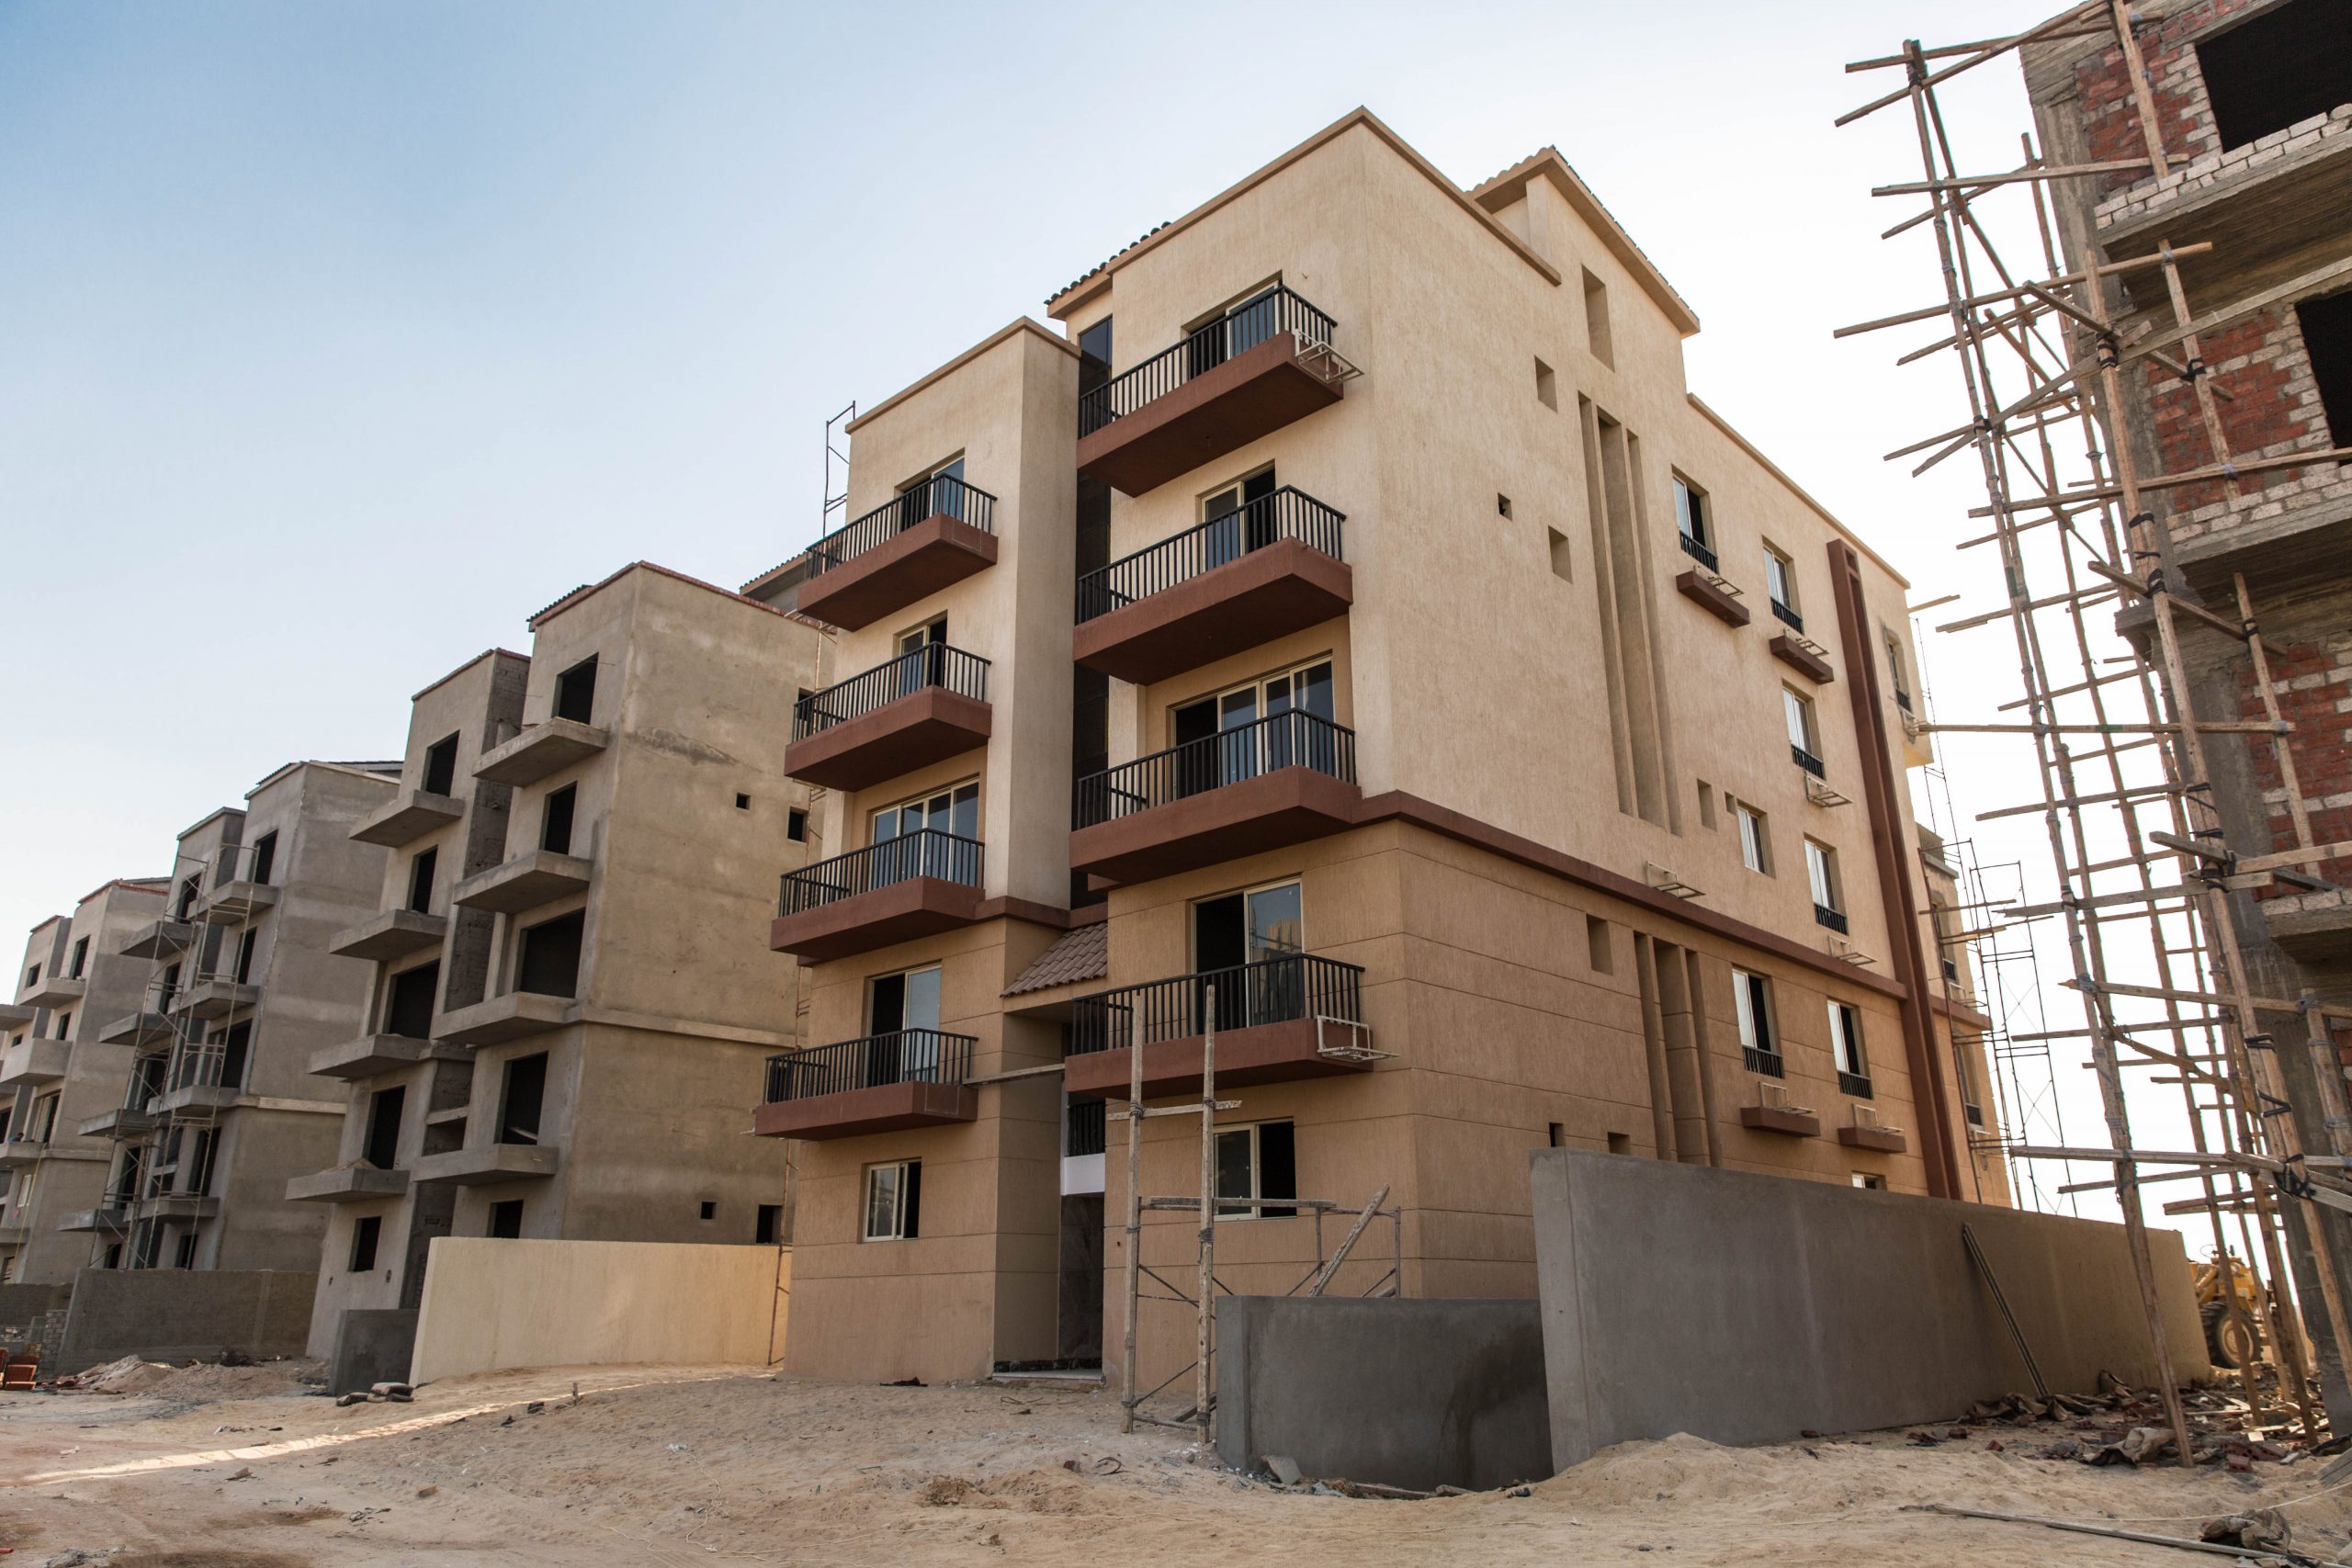 For lovers of sophistication, an apartment for sale in Neopolis Wadi Degla with an area of 207 m in New Cairo